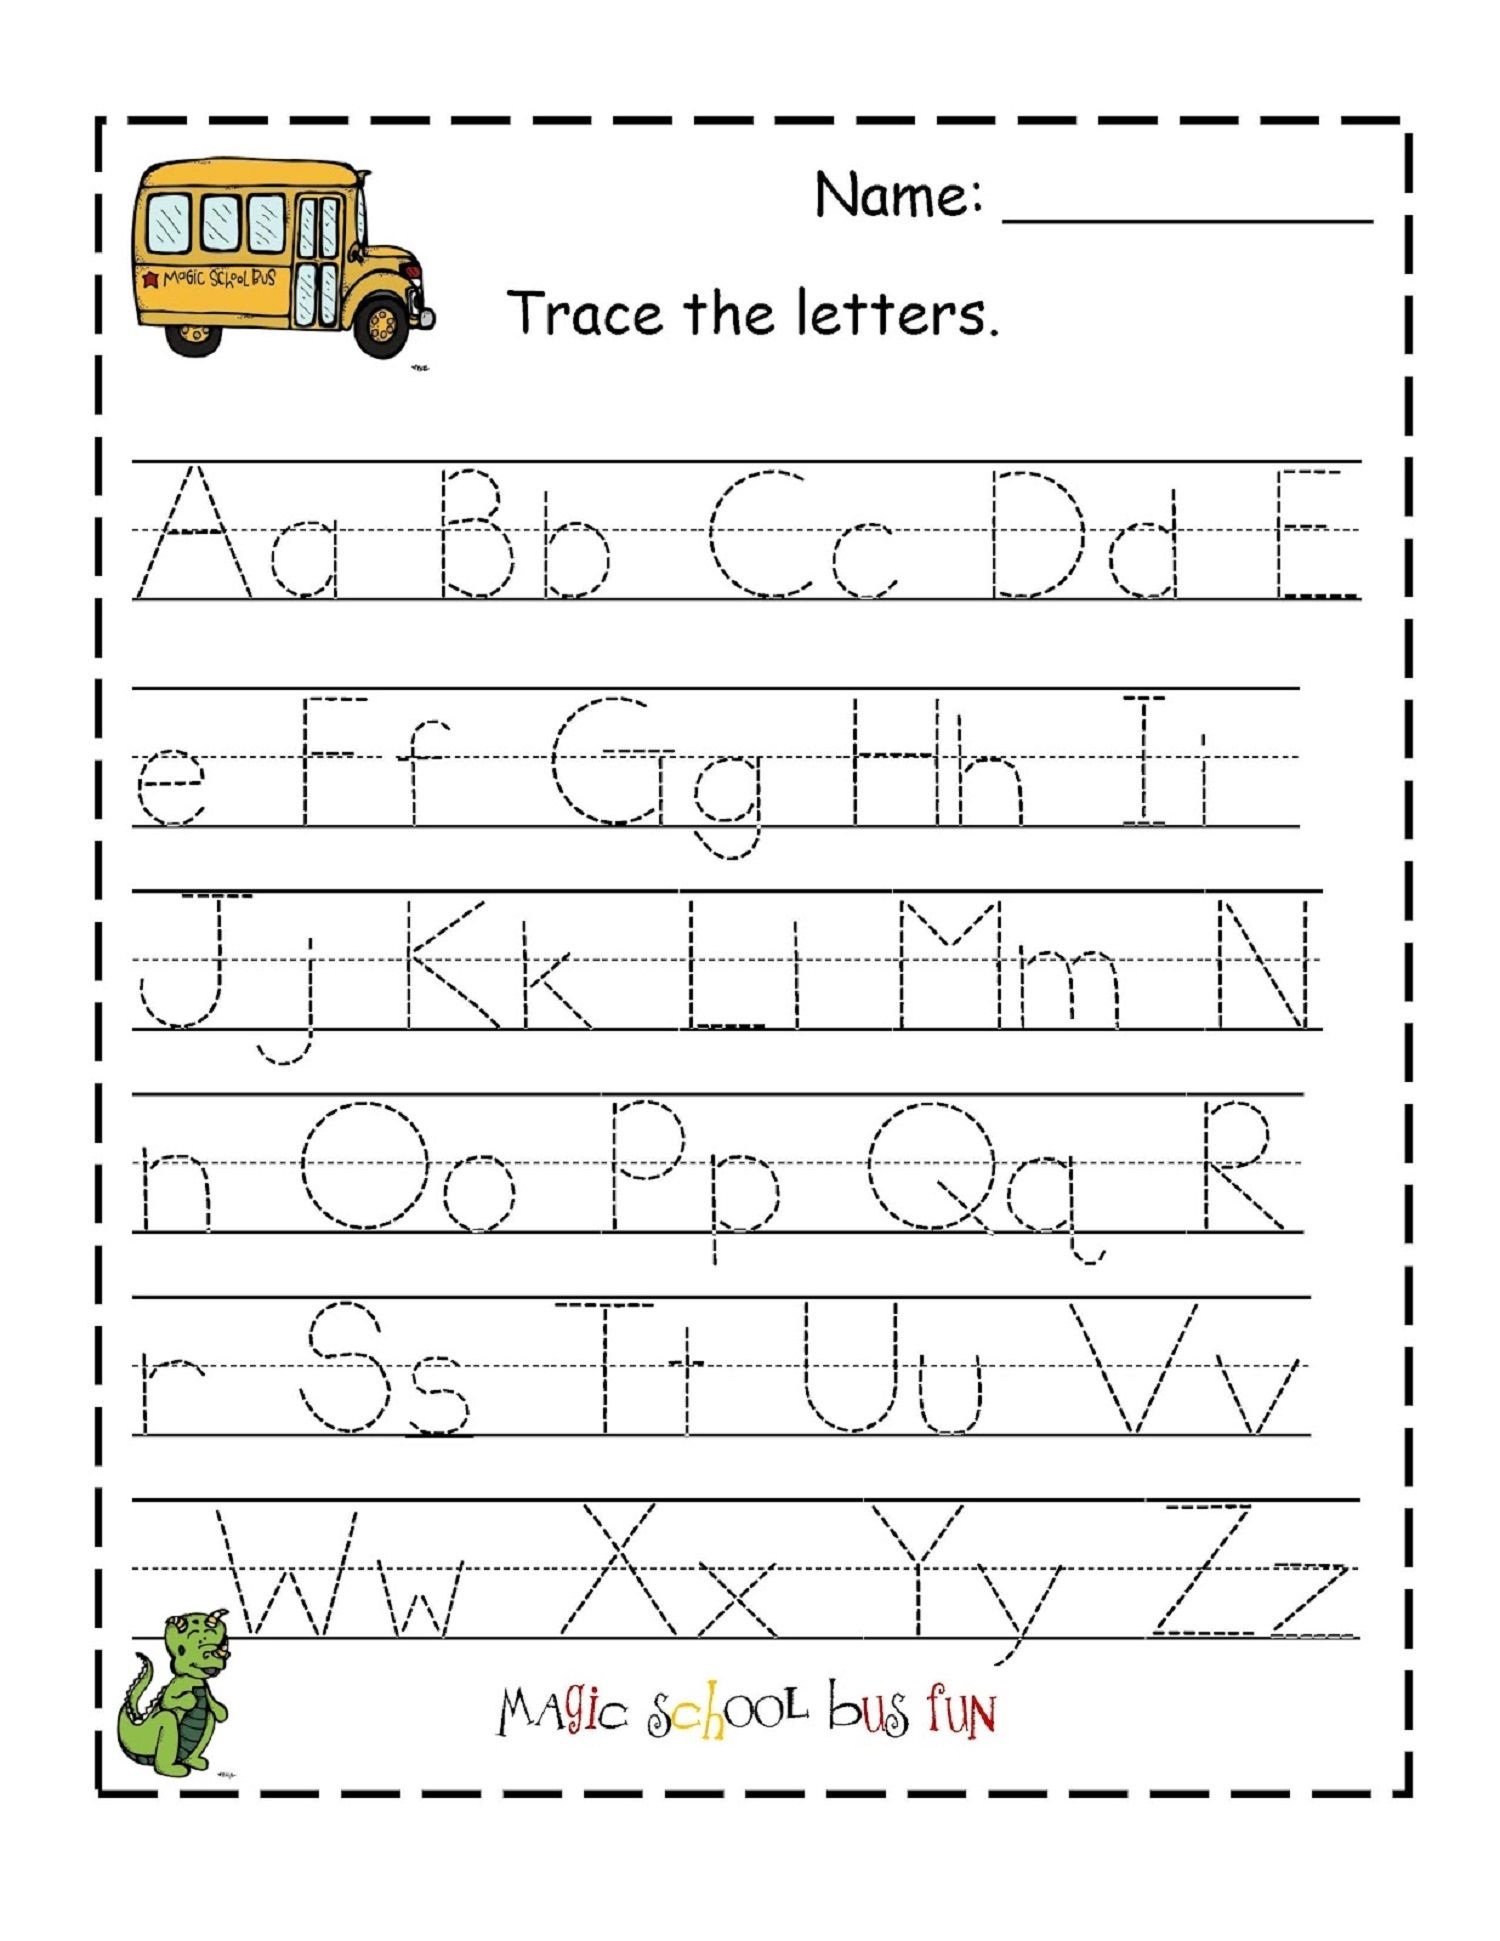 Traceable Alphabet For Learning Exercise | Letter Tracing pertaining to Tracing Letters For Kindergarten Pdf